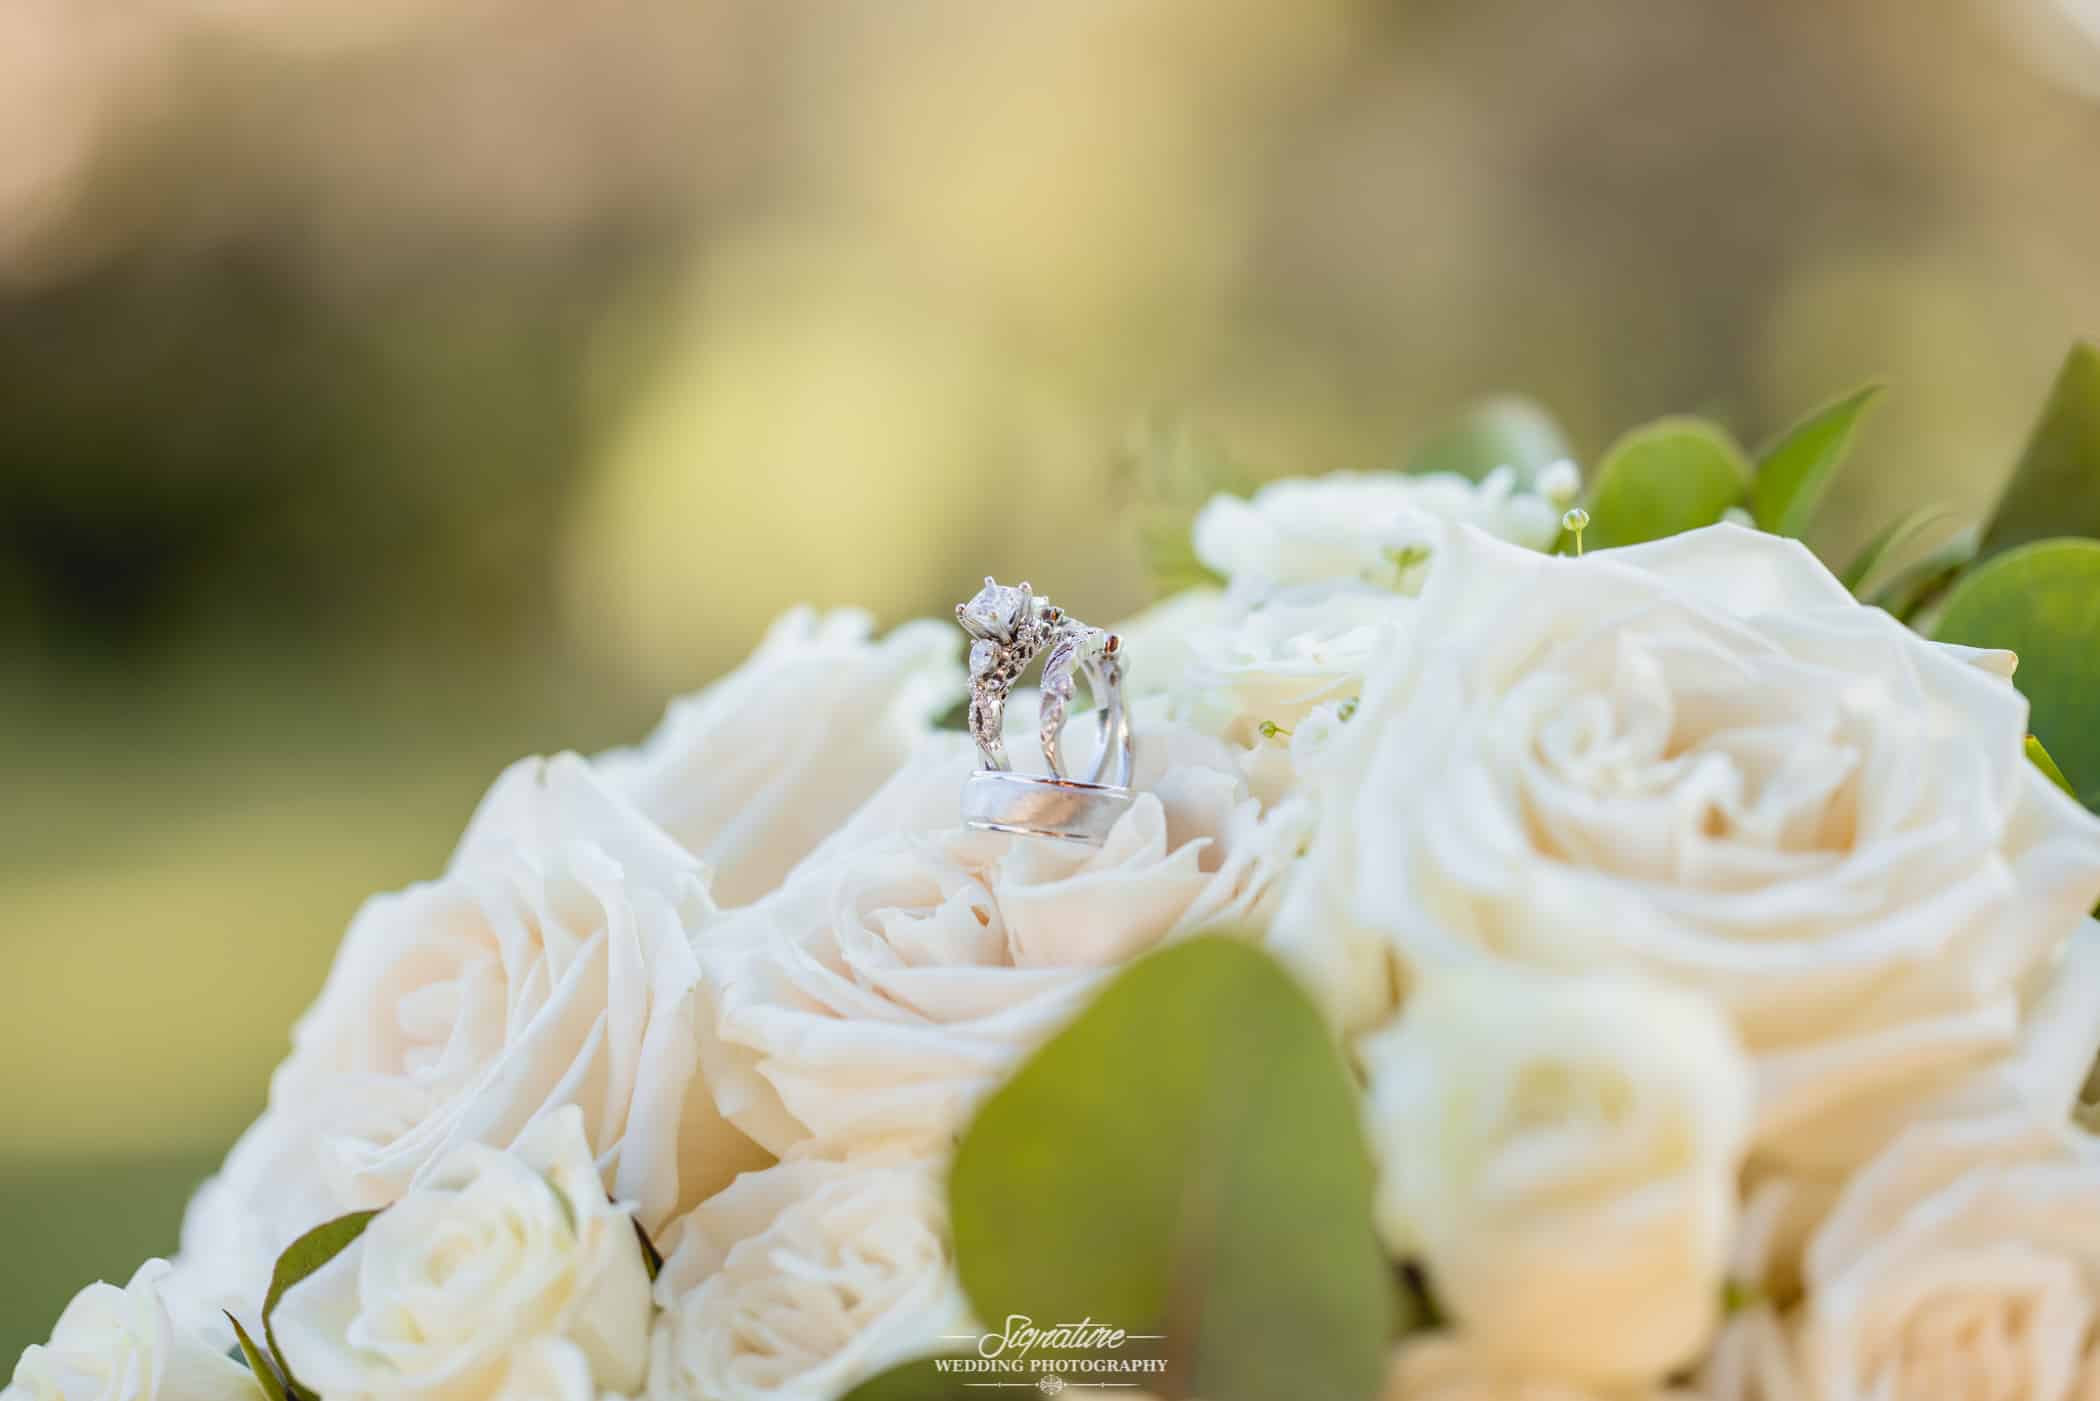 Close up of wedding rings on bouquet